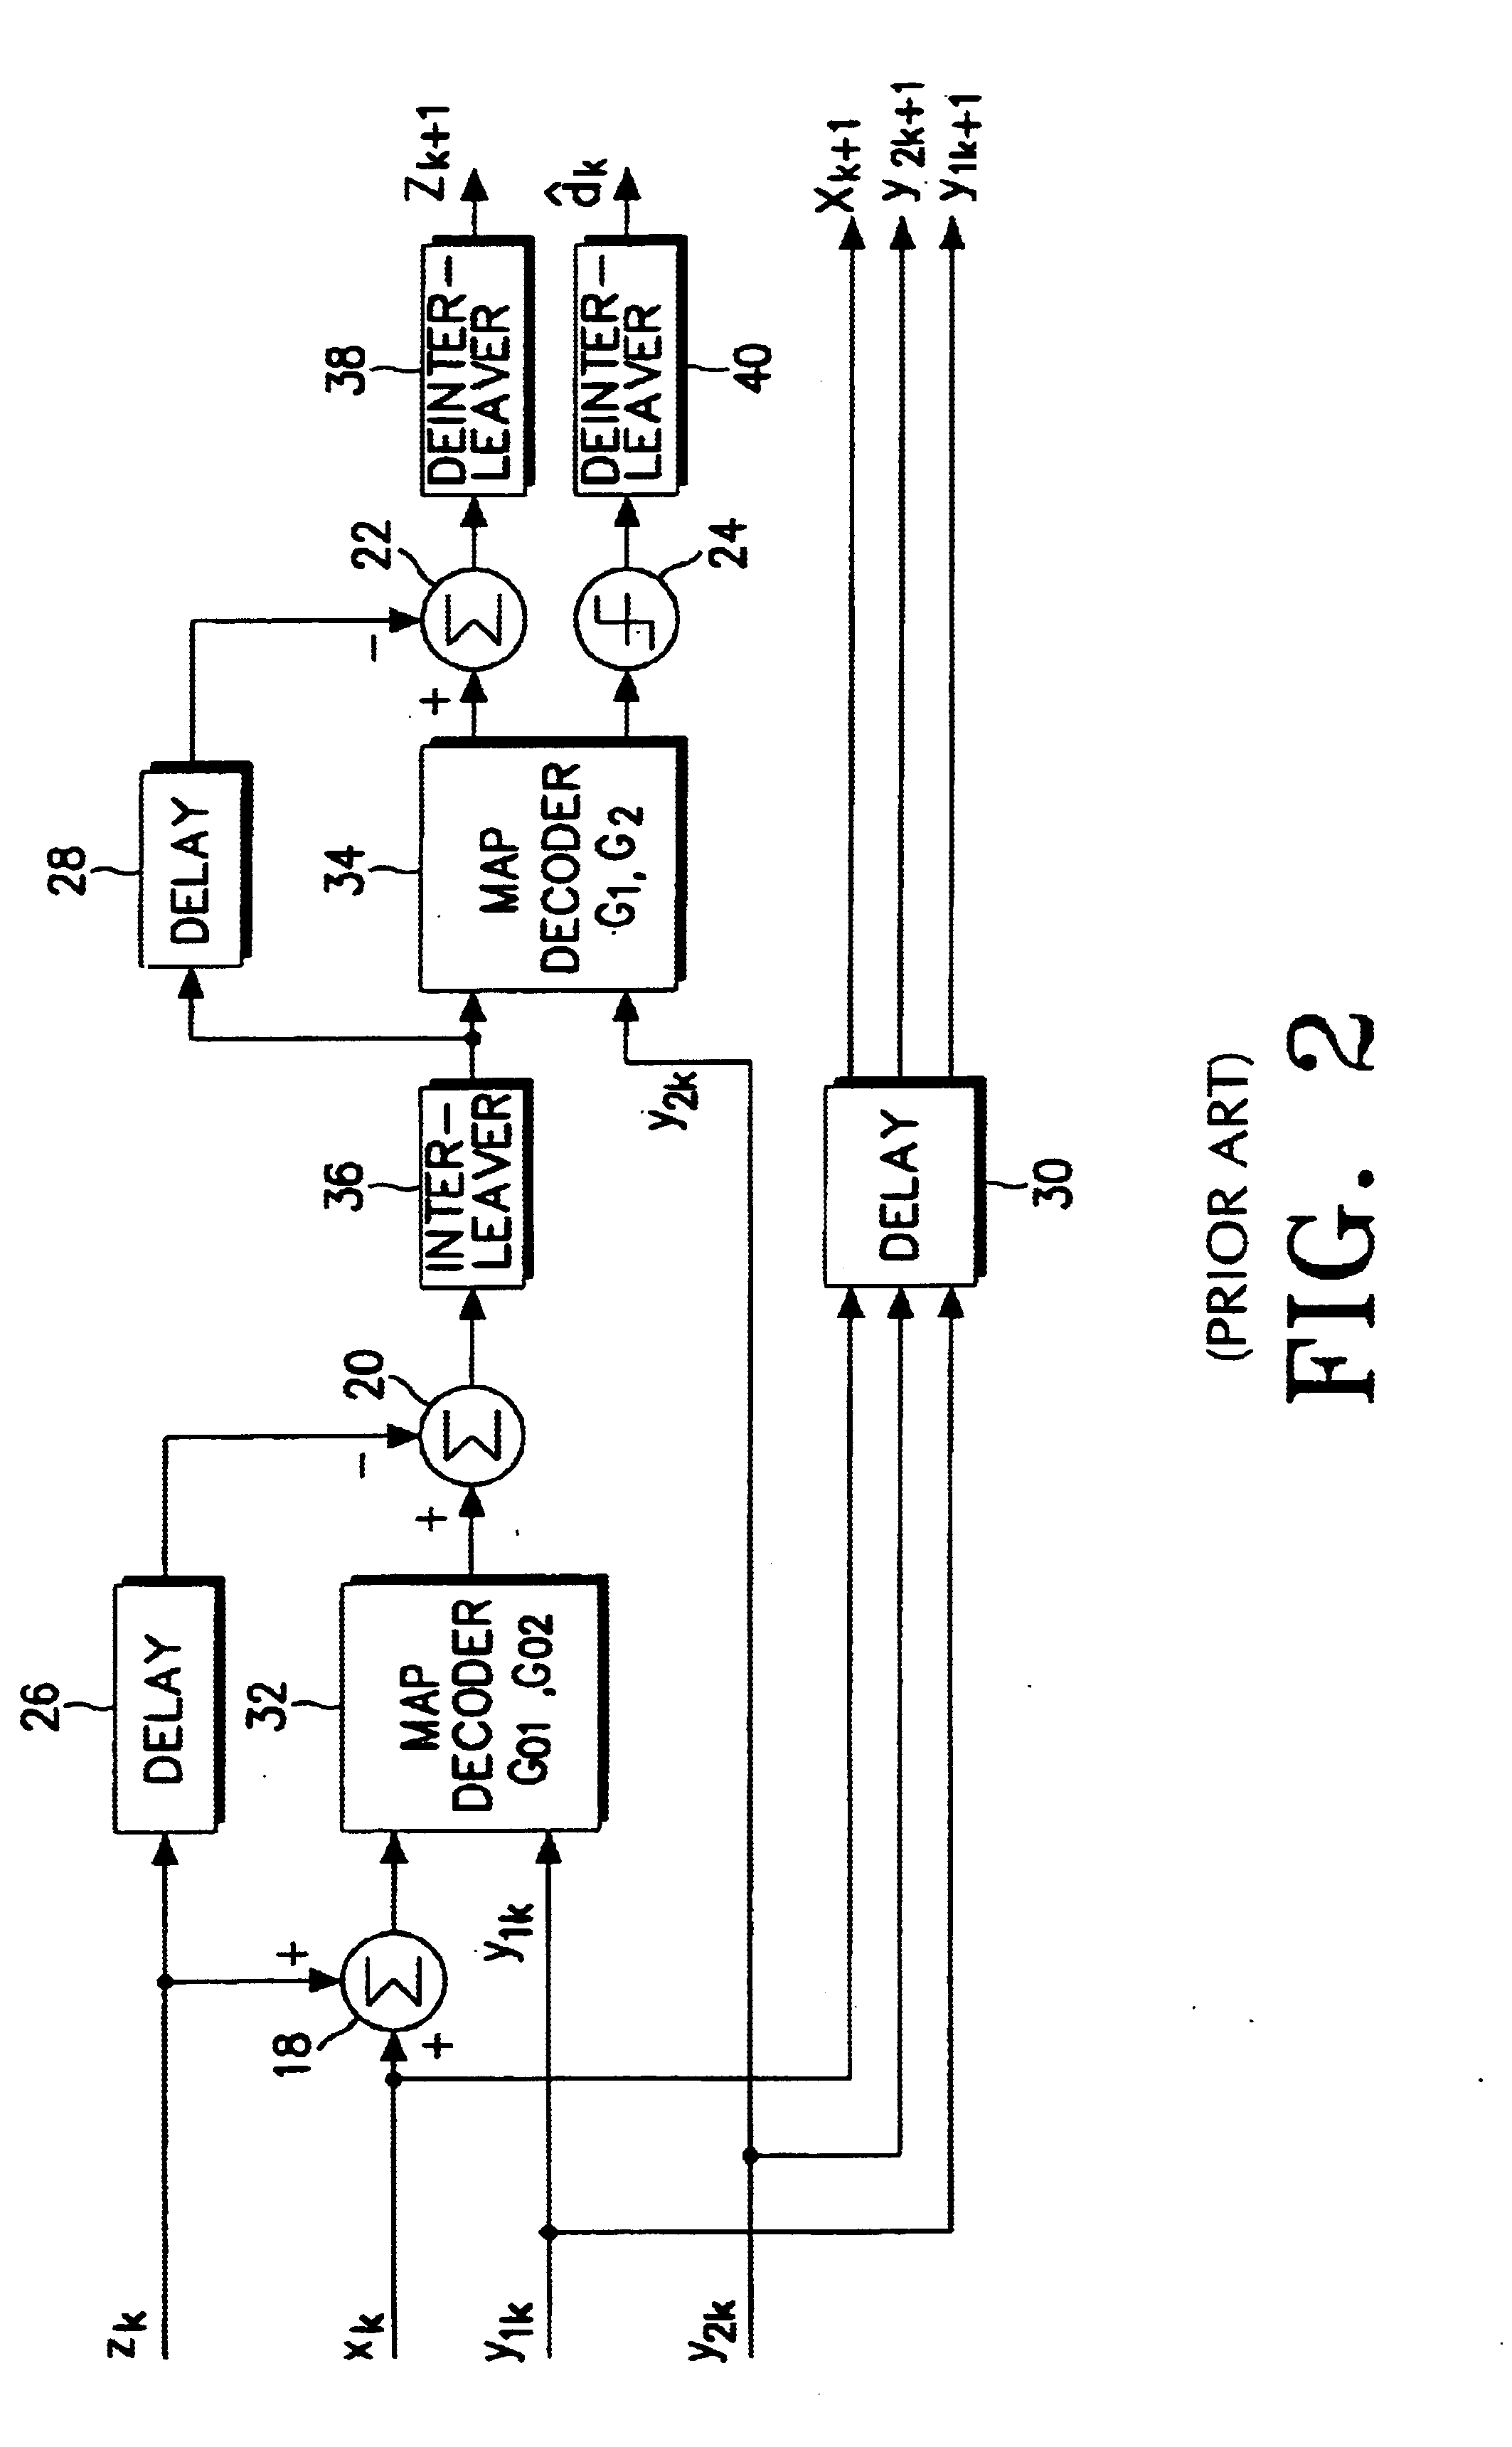 Apparatus and method for channel encoding/decoding in a communication system